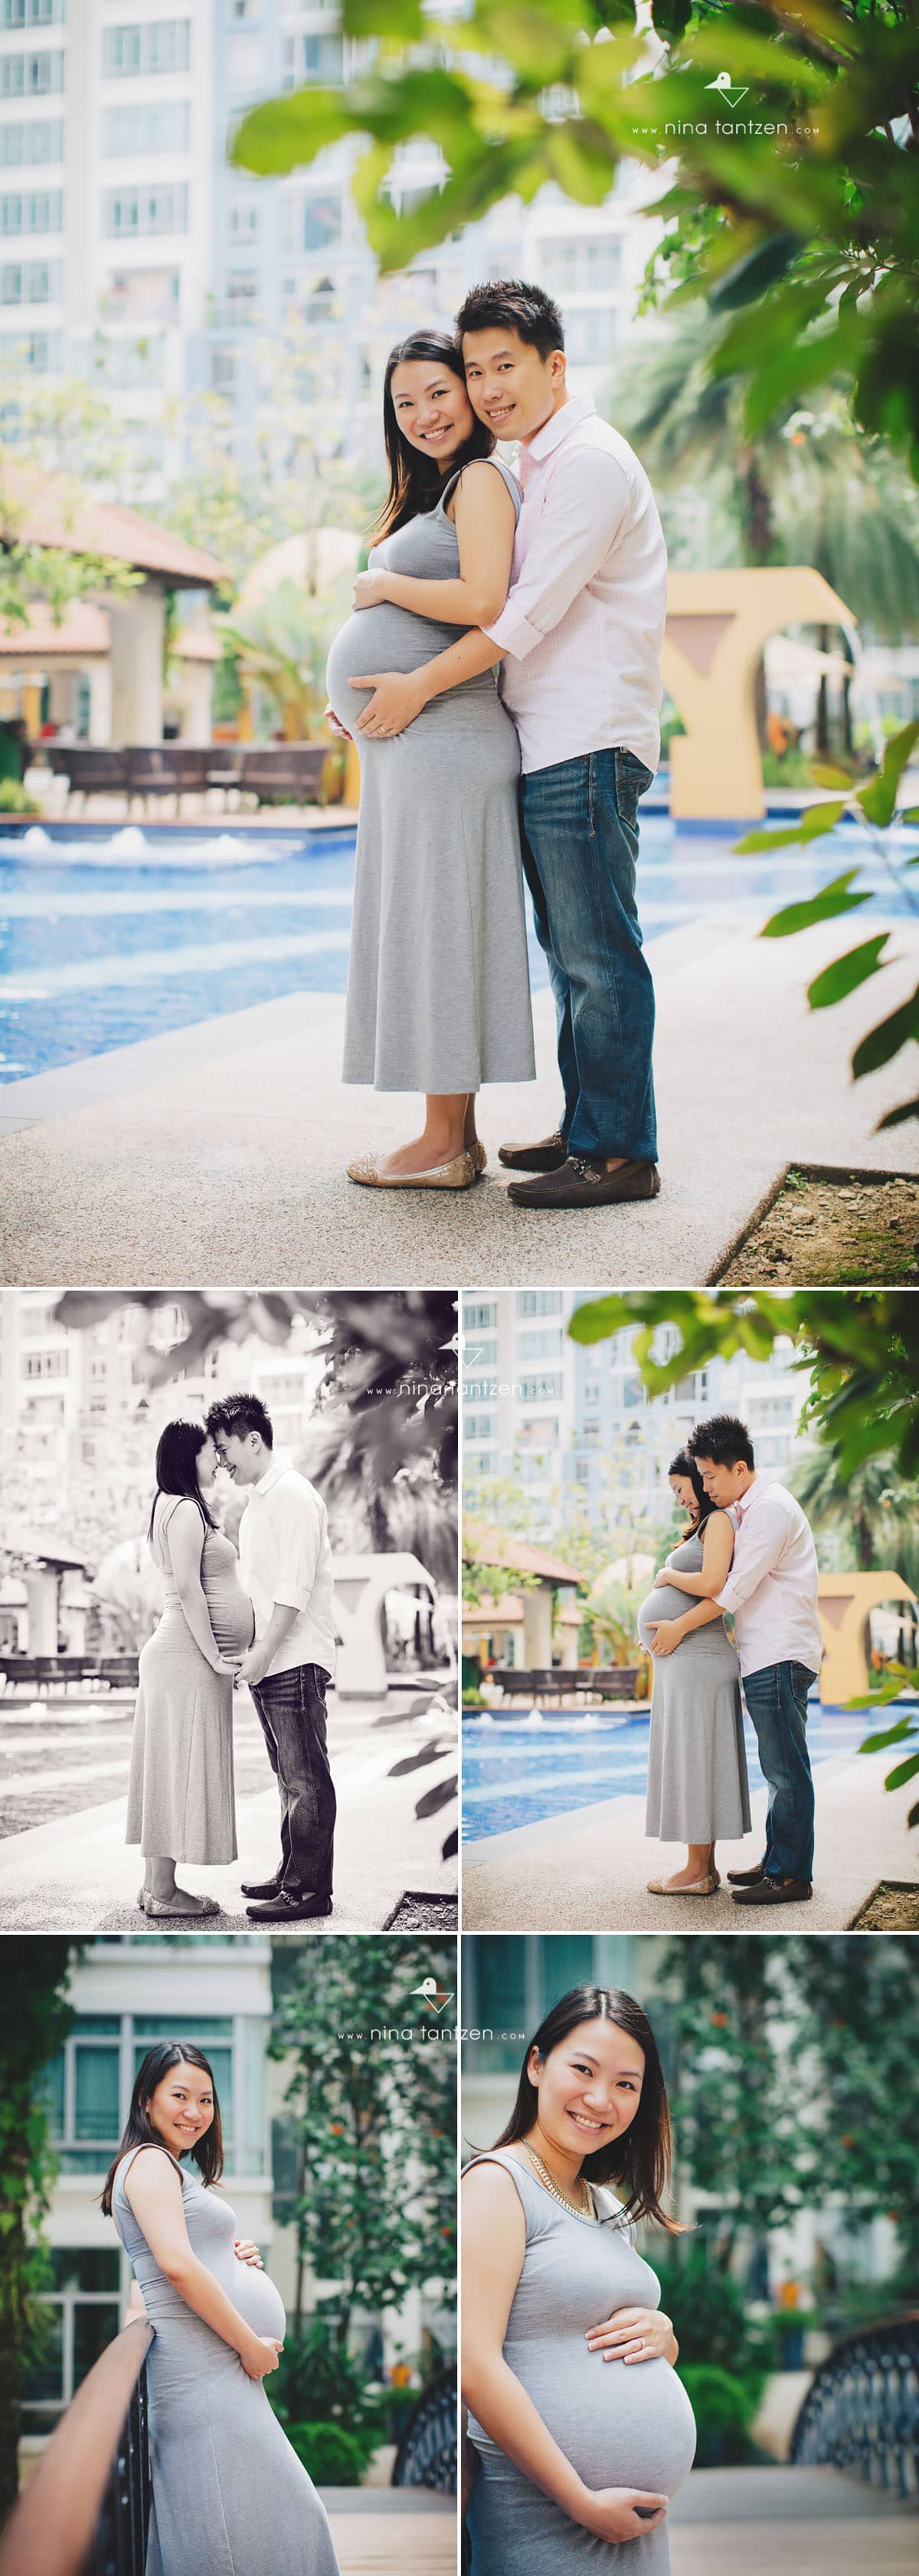 outdoor maternity portraits in singapore